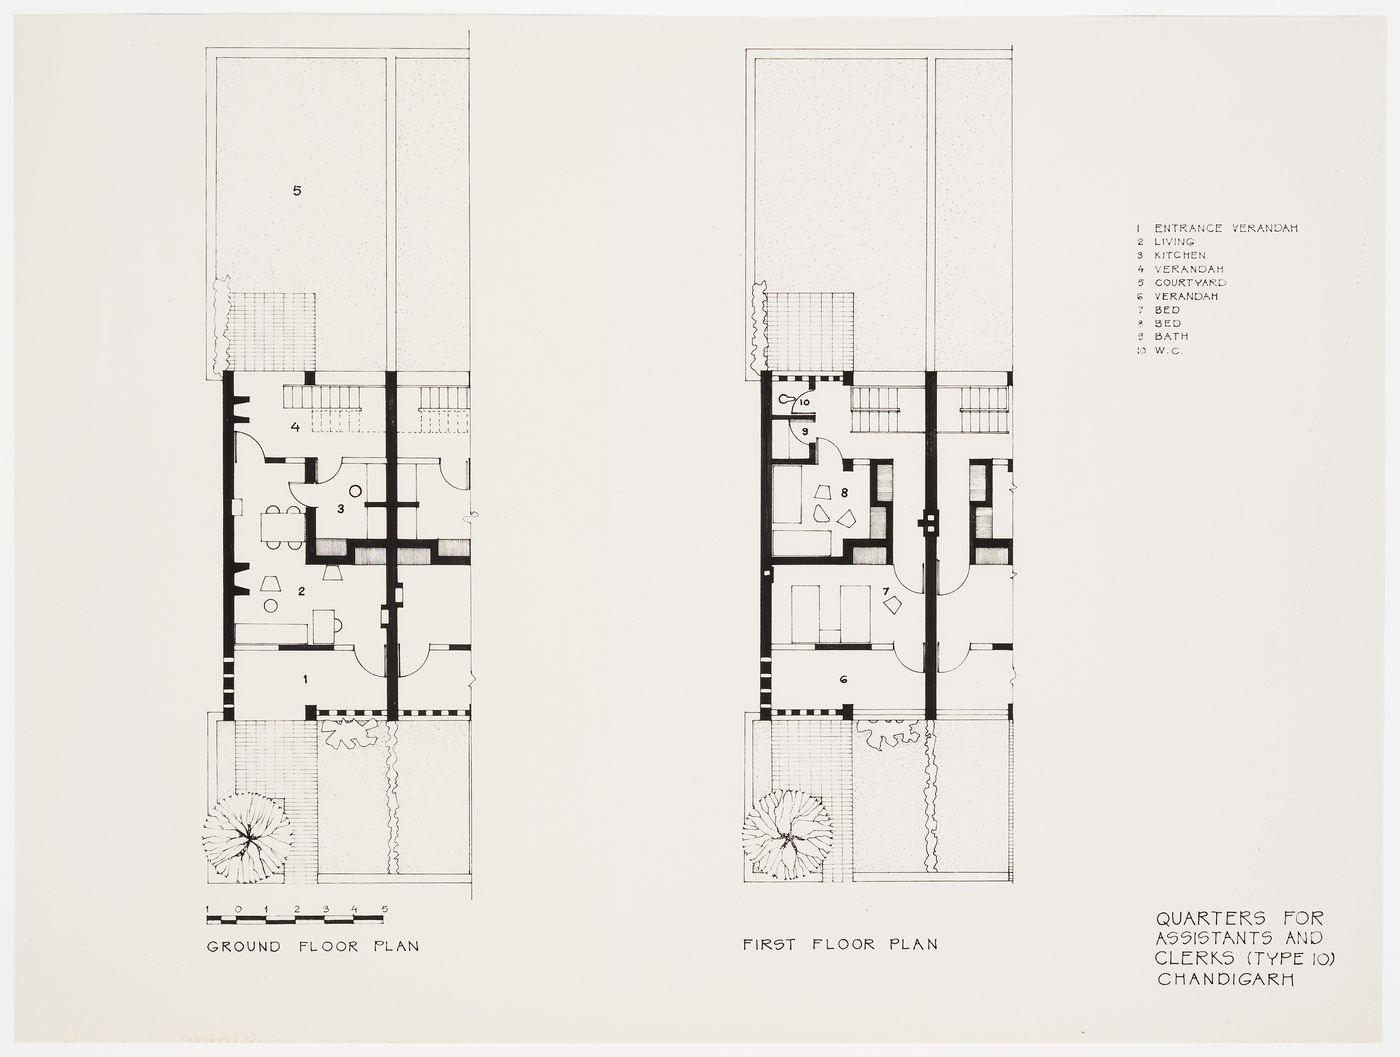 Plans for quarters for assistants and clerks (House Type 10), Chandigarh, India